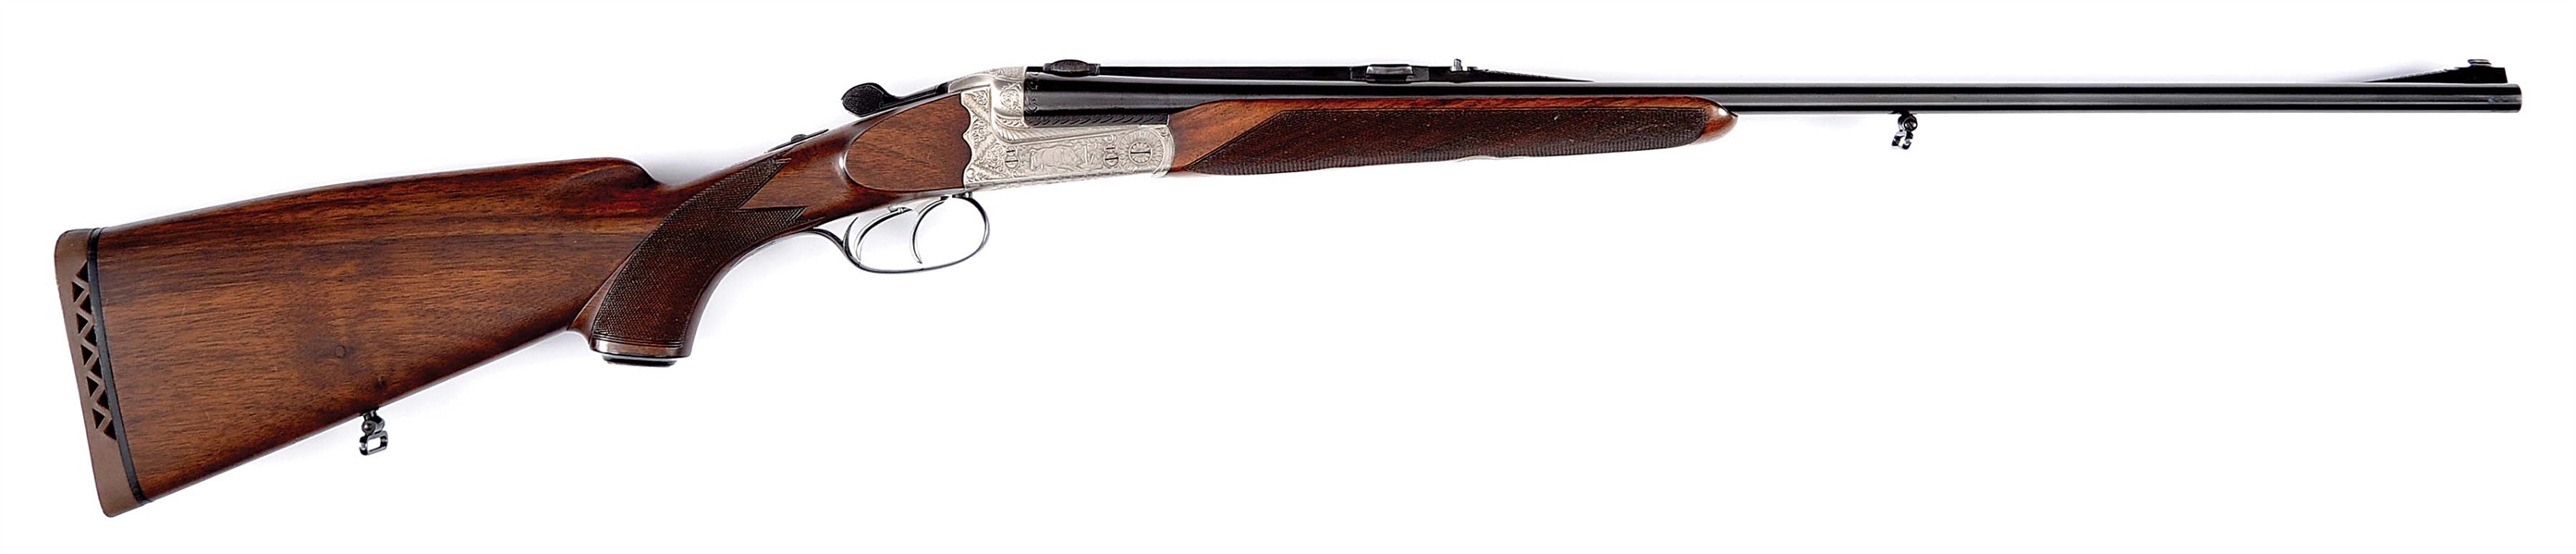 (C) FINE QUALITY NEAR NEW BOXLOCK EJECTOR DOUBLE RIFLE BY JOSEF WINKLER OF FERLACH RETAILED BY GRECO SPORT IN LUGANO.